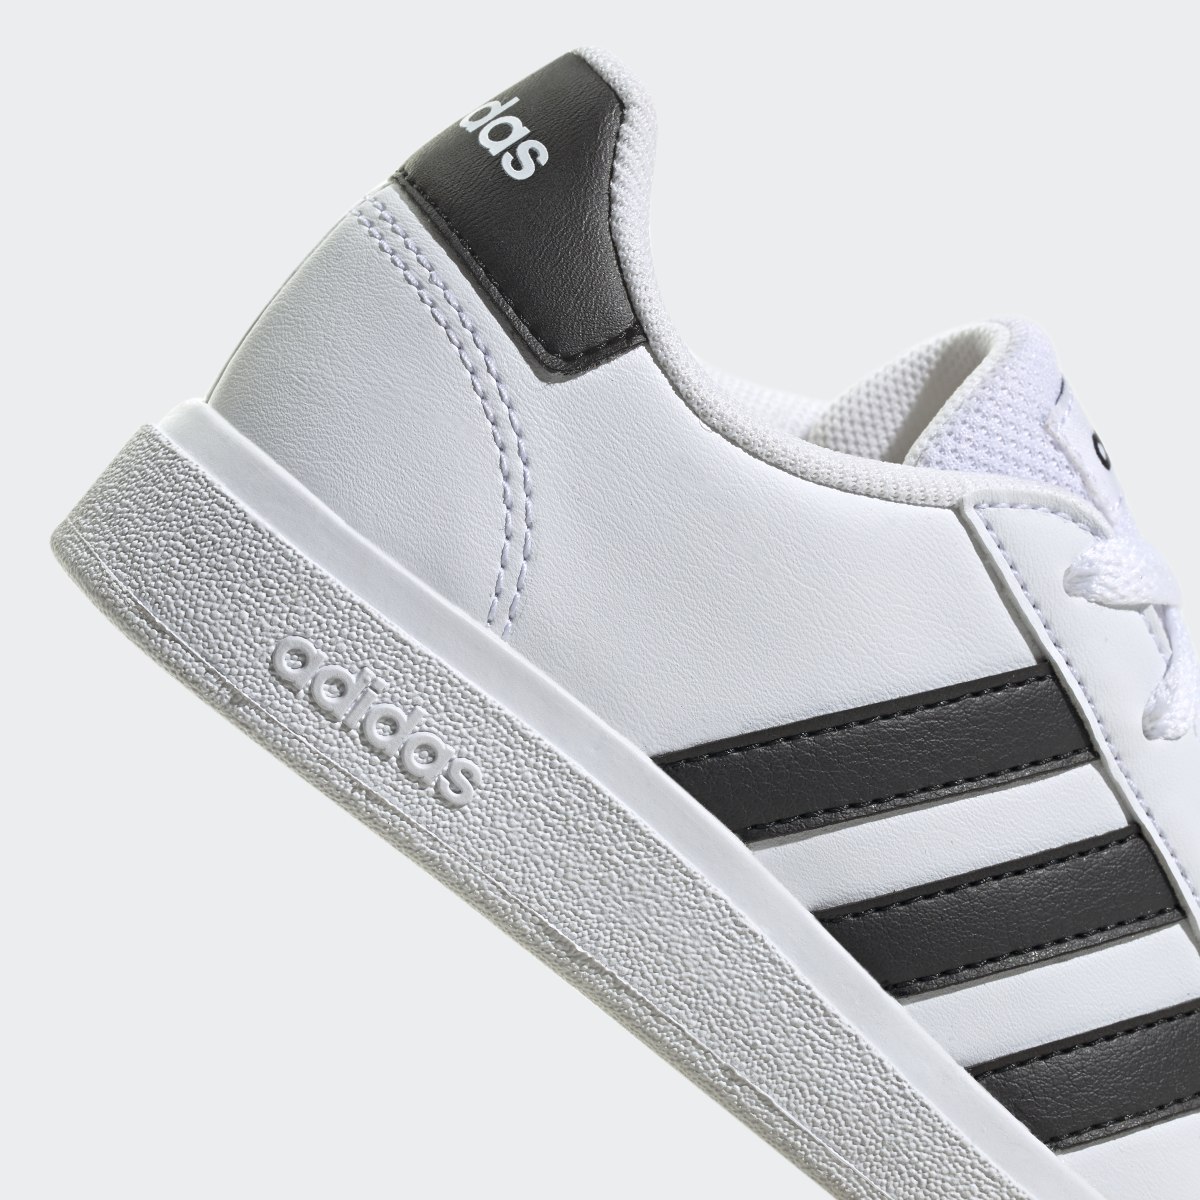 Adidas Grand Court 2.0 Shoes. 10